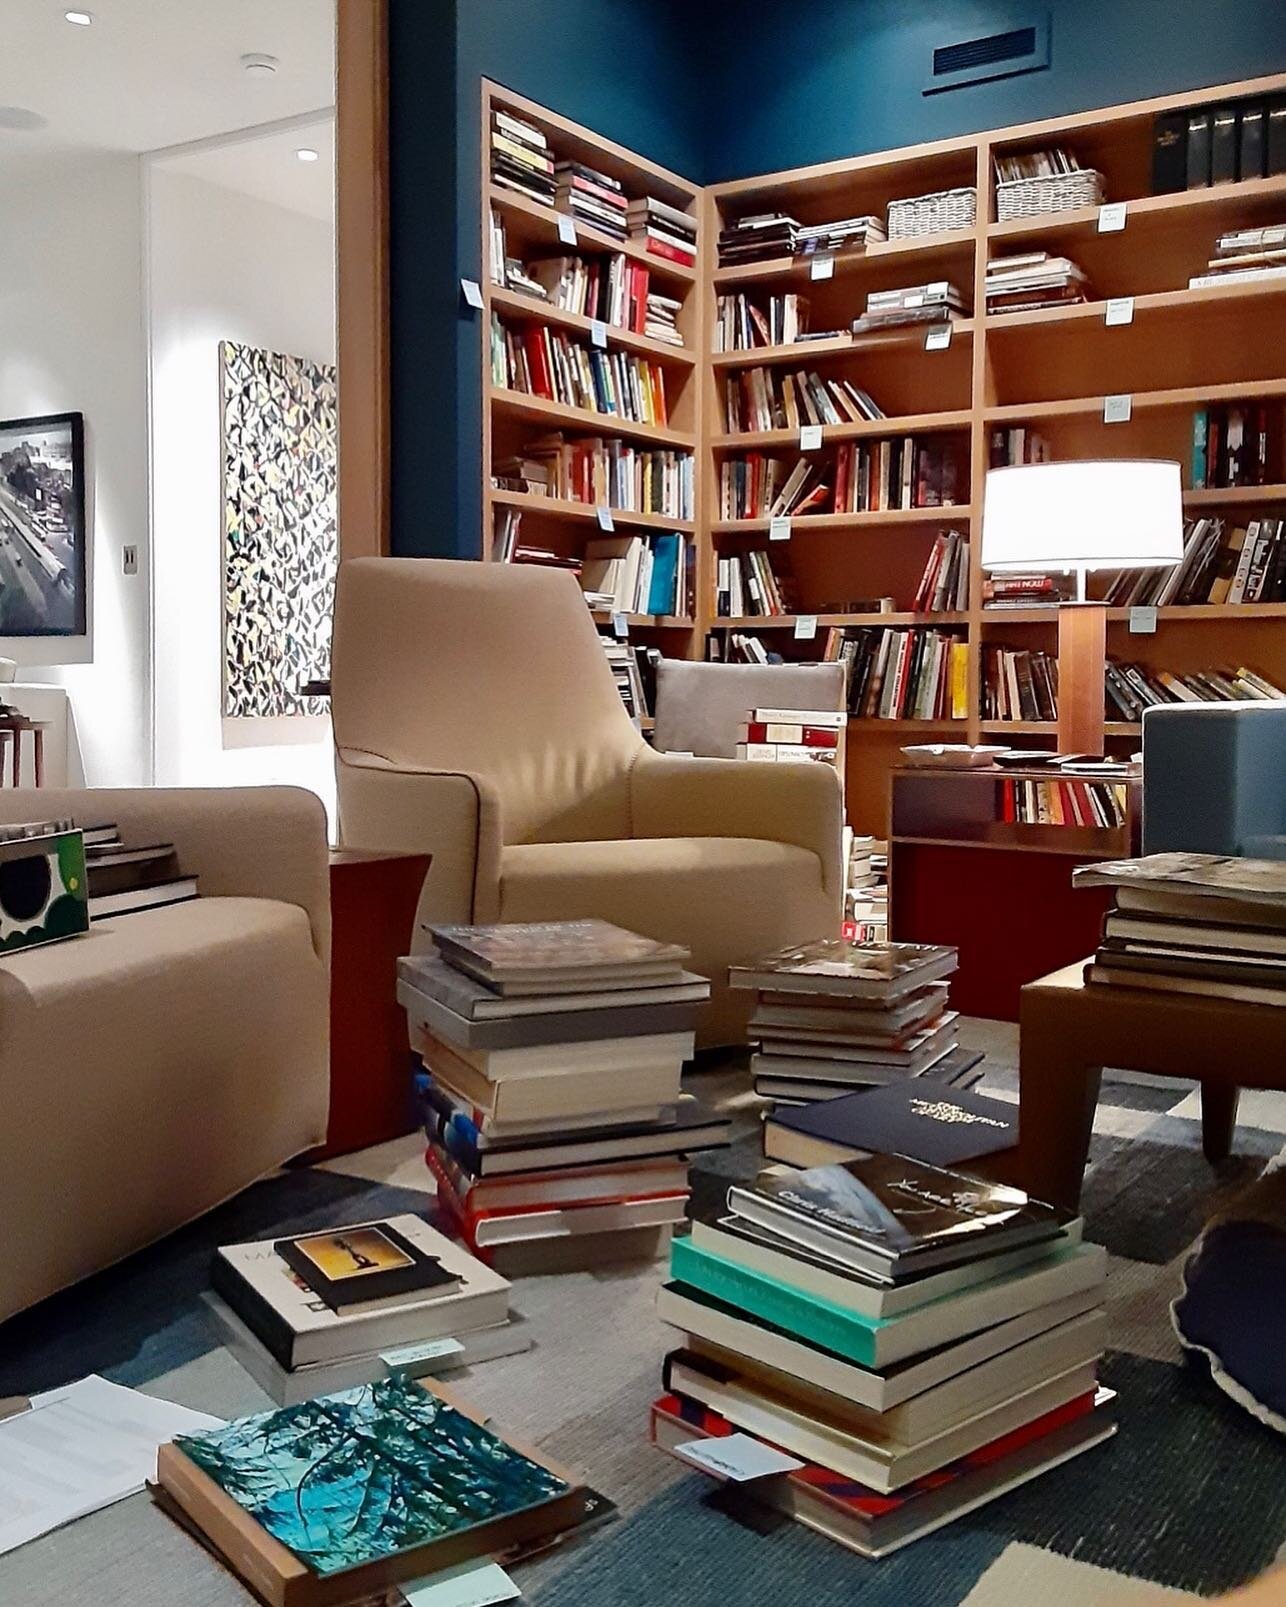 We bring order to chaos - the sort of chaos that's inevitable in a lifetime of reading, of culture and literature, of loving books so much that it's hard to get rid of them. In process shot: one corner of an organization project in the Dallas area. W